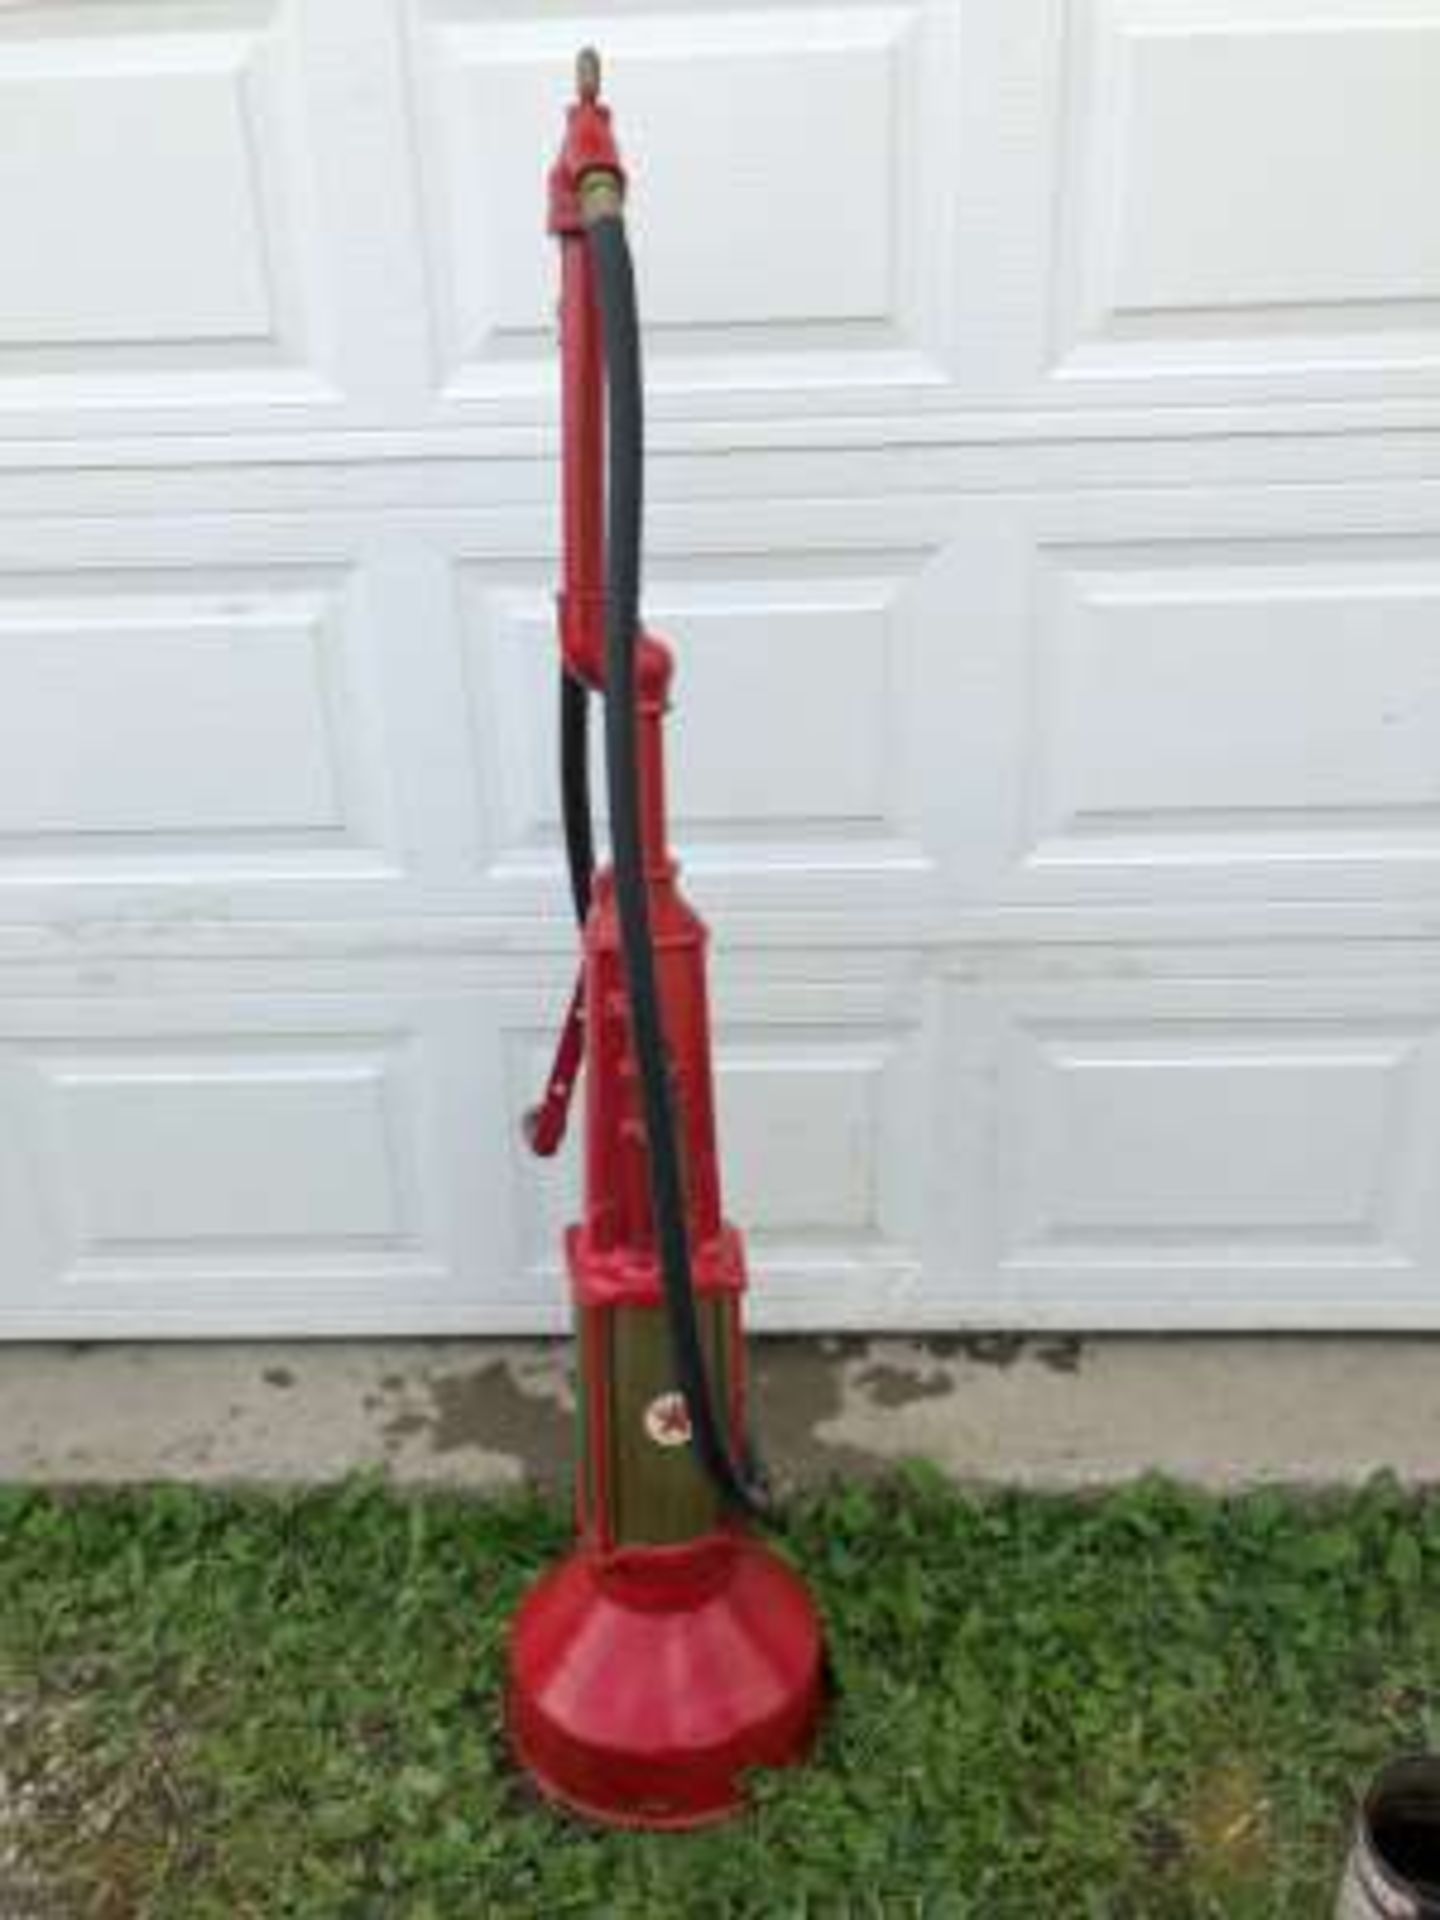 Old Texaco Barrel Pump for oil or gas